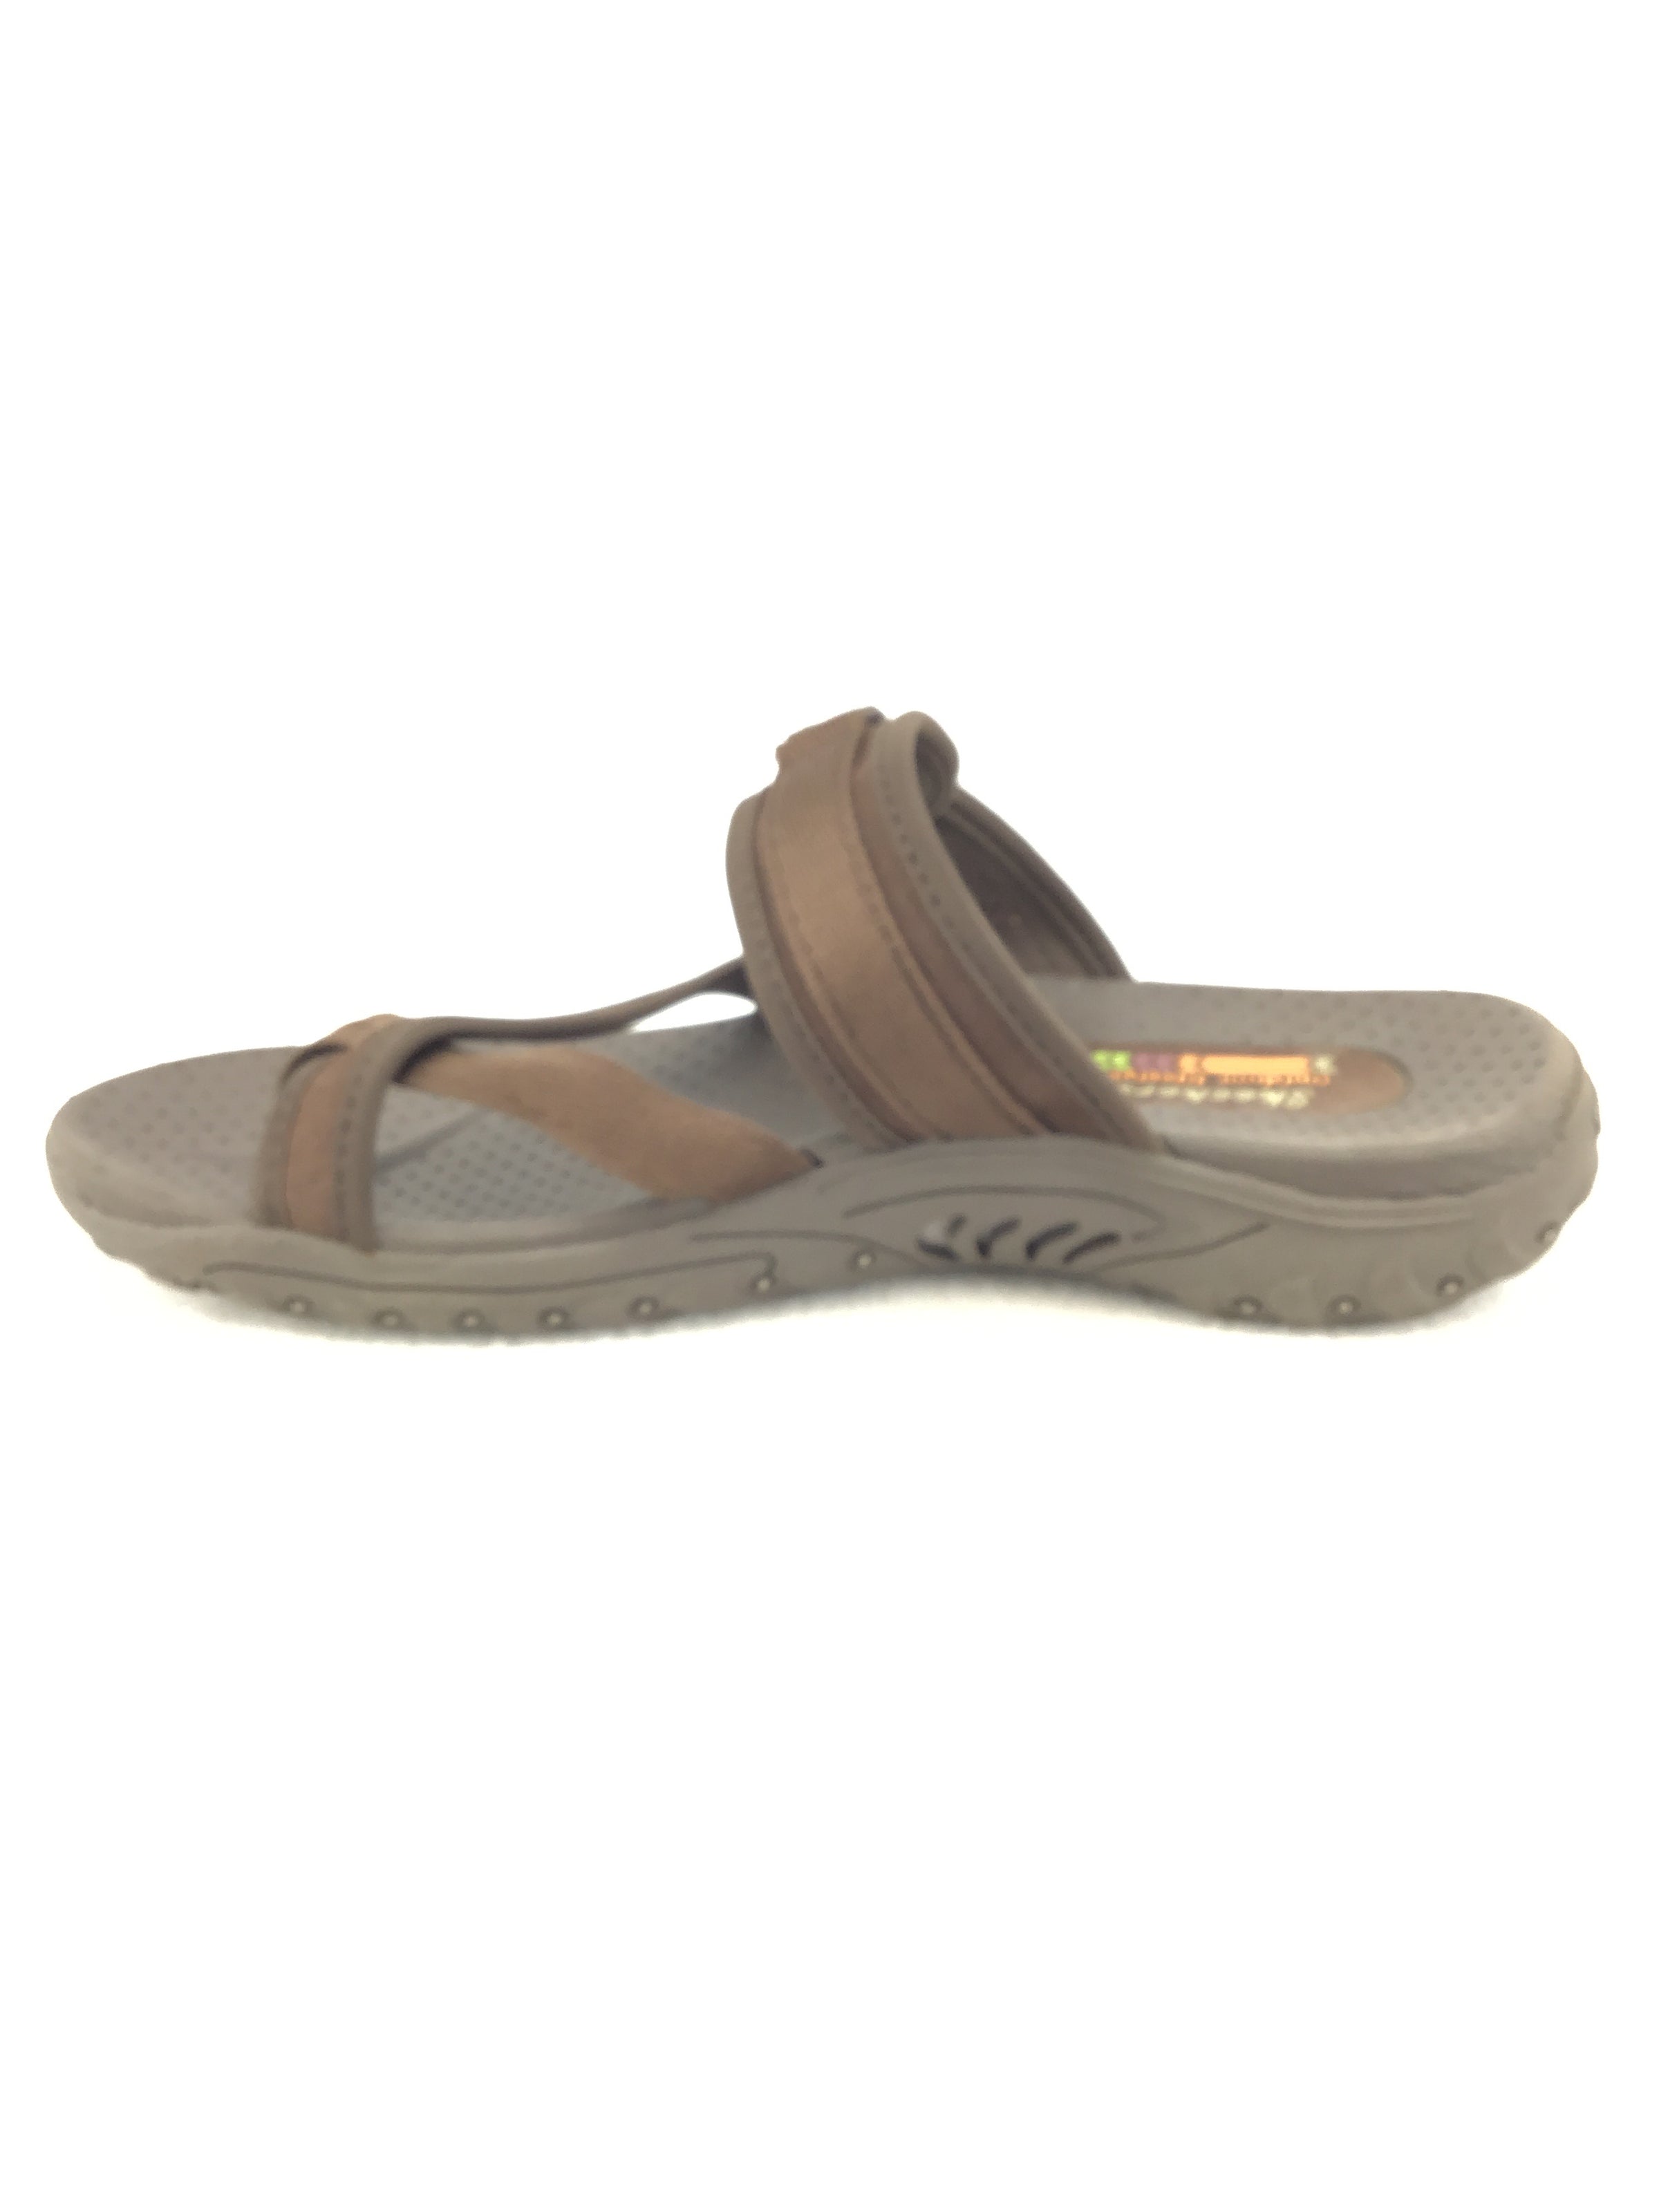 Skechers Outdoor Lifestyle Sandals Size 8